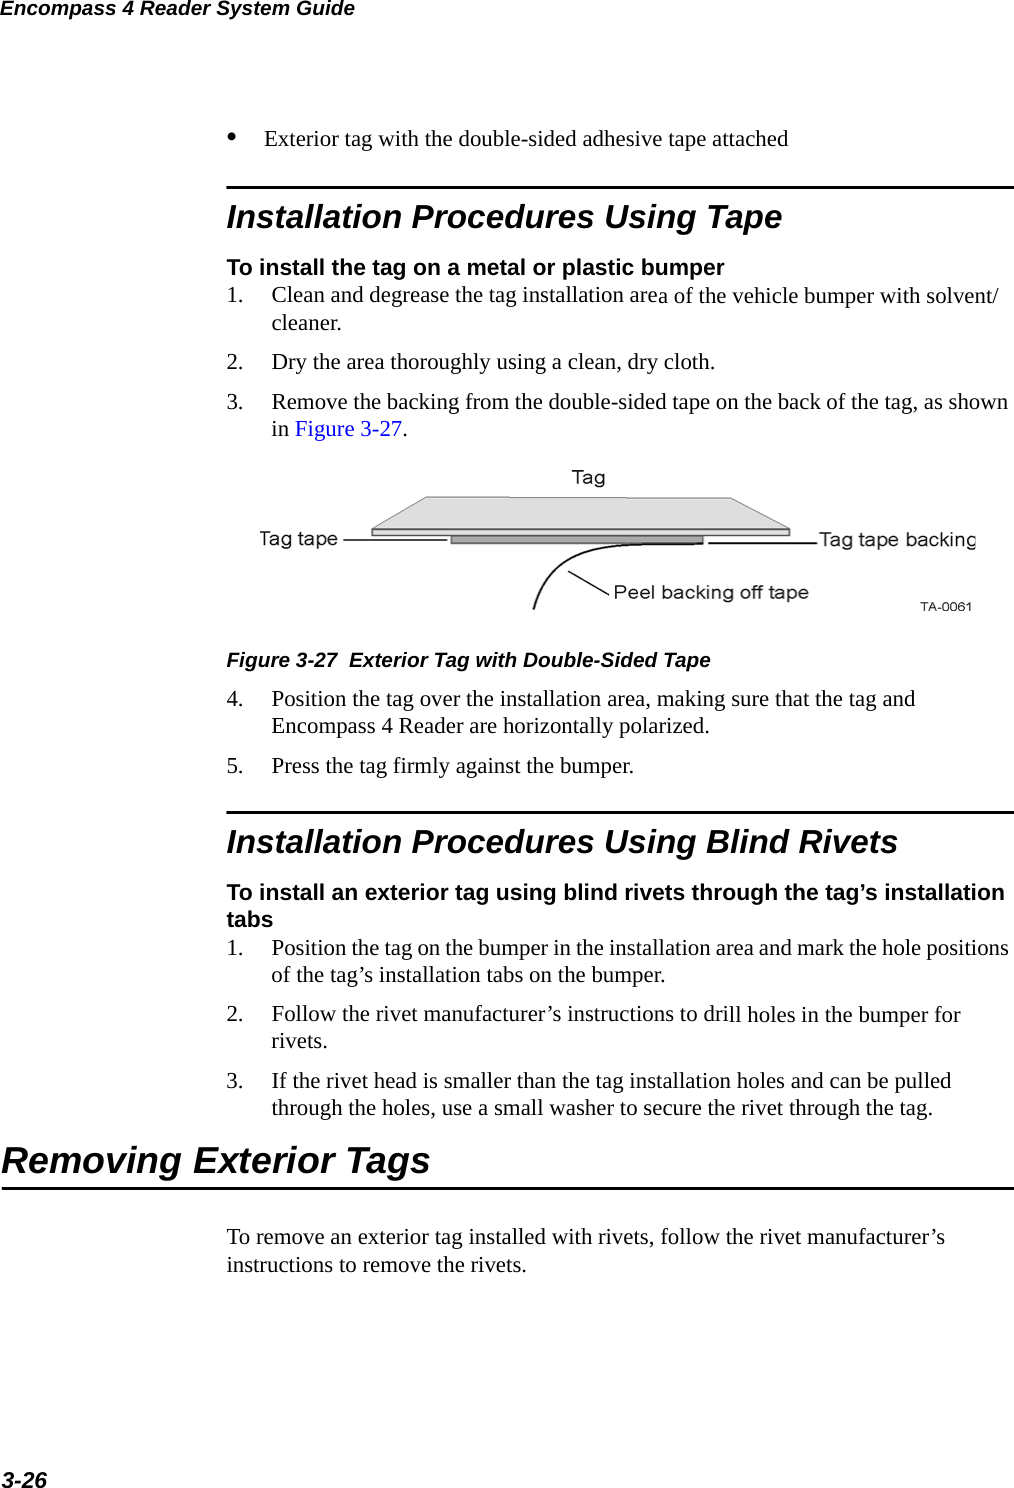 Encompass 4 Reader System Guide3-26•Exterior tag with the double-sided adhesive tape attached Installation Procedures Using TapeTo install the tag on a metal or plastic bumper1. Clean and degrease the tag installation area of the vehicle bumper with solvent/cleaner.2. Dry the area thoroughly using a clean, dry cloth.3. Remove the backing from the double-sided tape on the back of the tag, as shown in Figure 3-27. Figure 3-27  Exterior Tag with Double-Sided Tape4. Position the tag over the installation area, making sure that the tag and Encompass 4 Reader are horizontally polarized.5. Press the tag firmly against the bumper.Installation Procedures Using Blind RivetsTo install an exterior tag using blind rivets through the tag’s installation tabs1. Position the tag on the bumper in the installation area and mark the hole positions of the tag’s installation tabs on the bumper.2. Follow the rivet manufacturer’s instructions to drill holes in the bumper for rivets.3. If the rivet head is smaller than the tag installation holes and can be pulled through the holes, use a small washer to secure the rivet through the tag.Removing Exterior TagsTo remove an exterior tag installed with rivets, follow the rivet manufacturer’s instructions to remove the rivets.